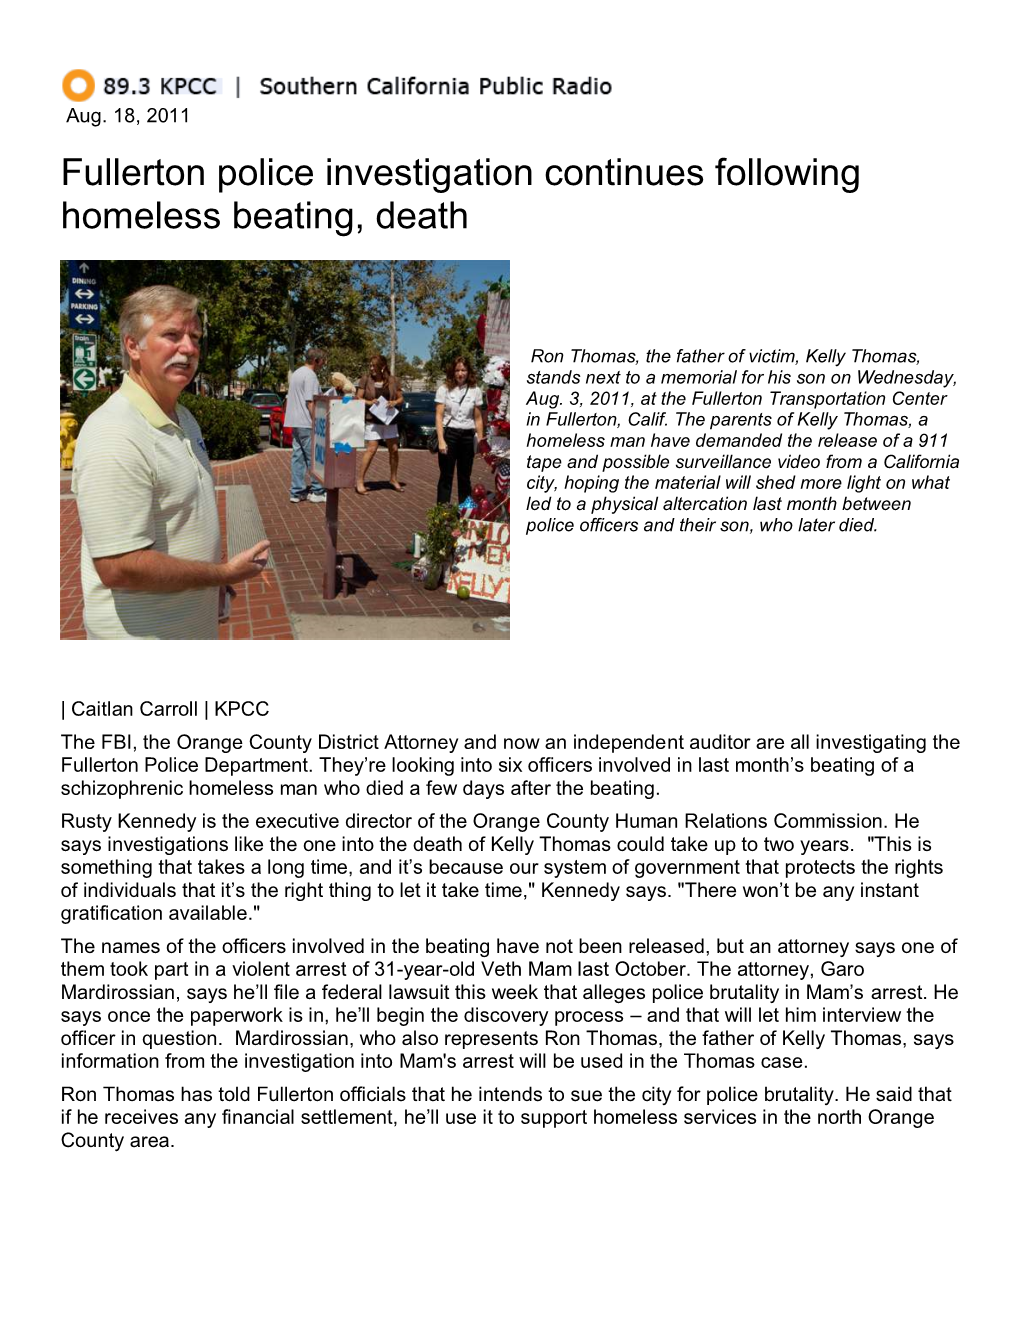 Fullerton Police Investigation Continues Following Homeless Beating, Death